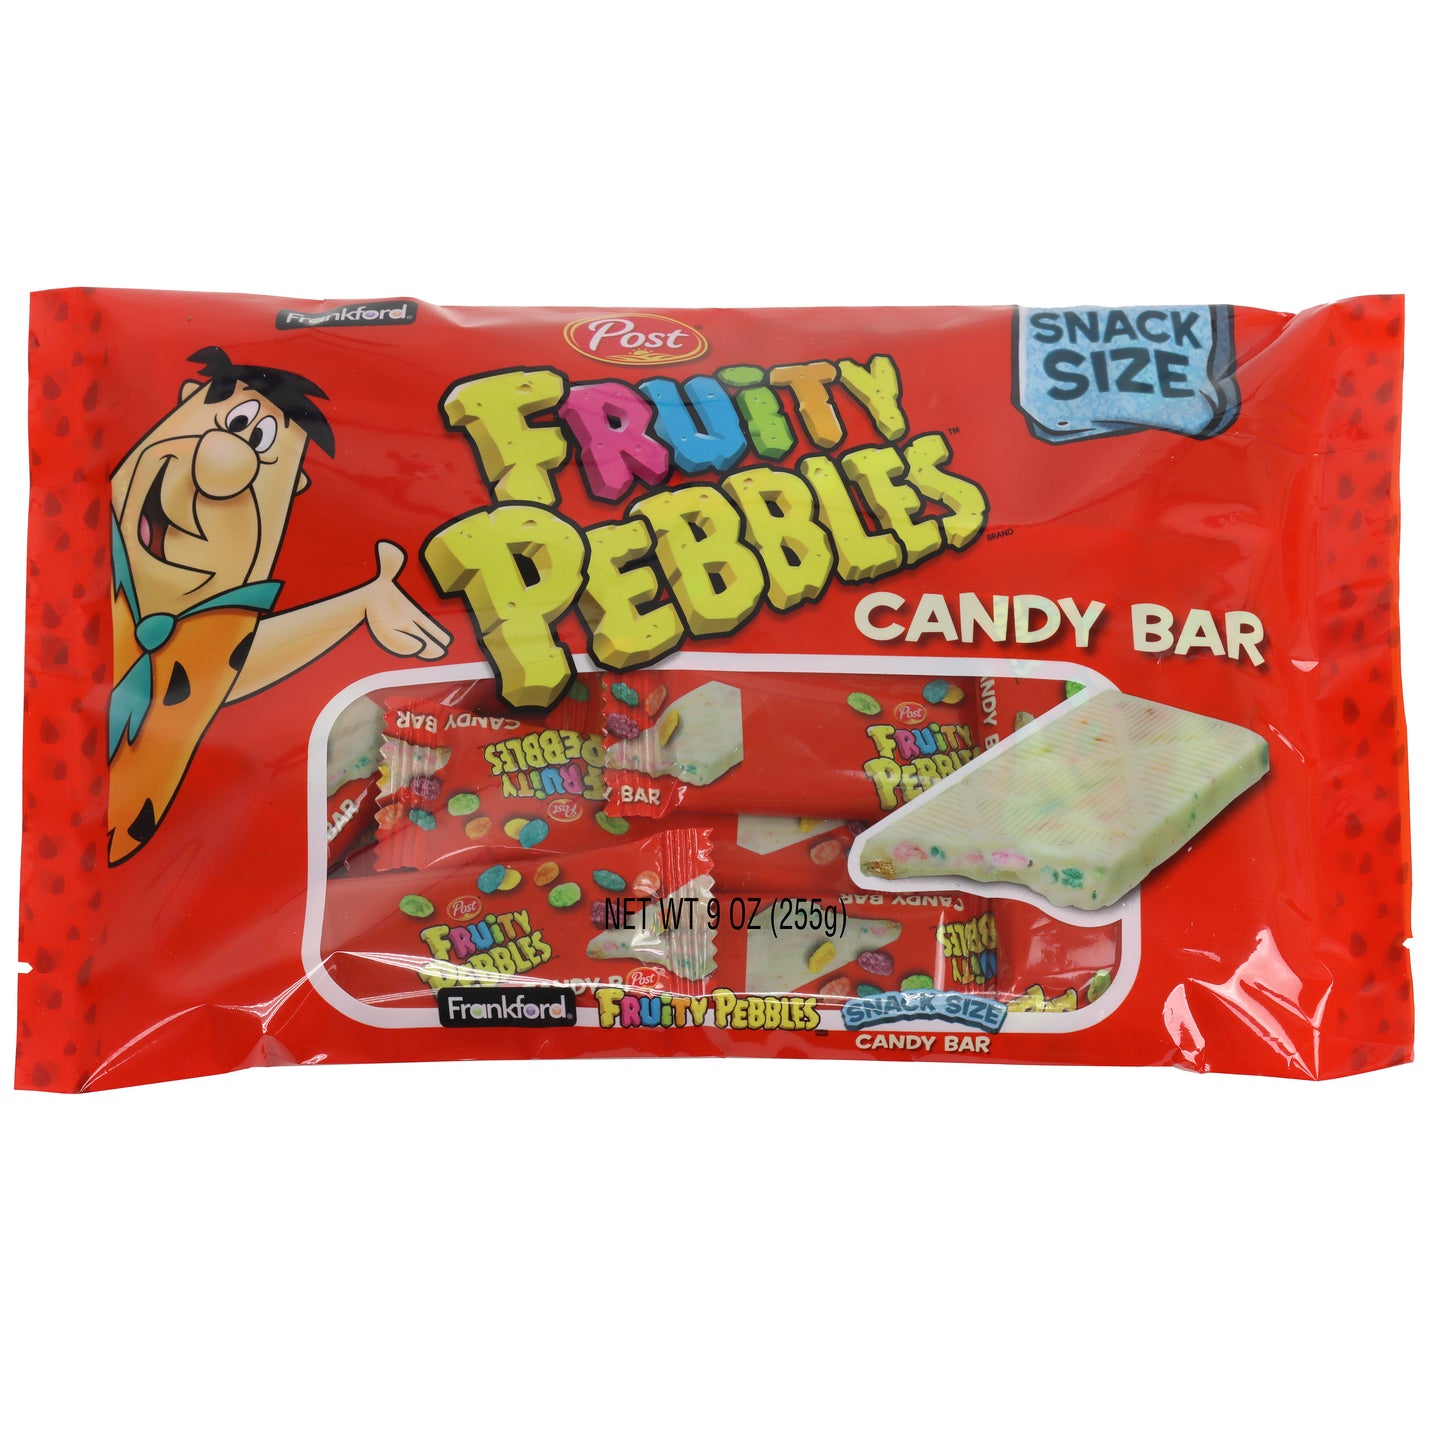 Fruity Pebbles & Rice Krispies Cereal Snack Size Bag